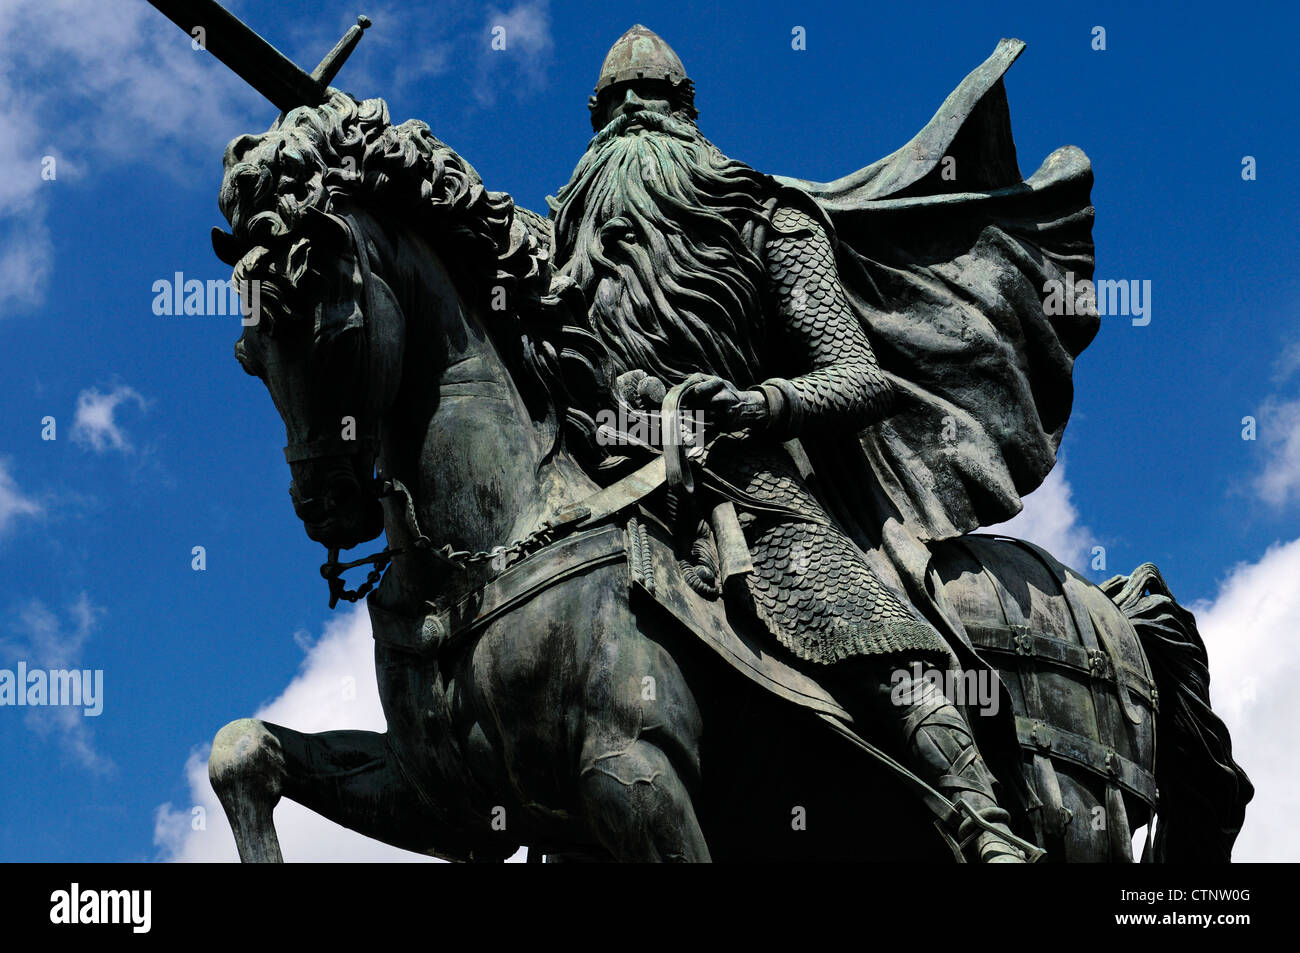 Spain: Heroic monument of 'El Cid' in the center of Burgos Stock Photo